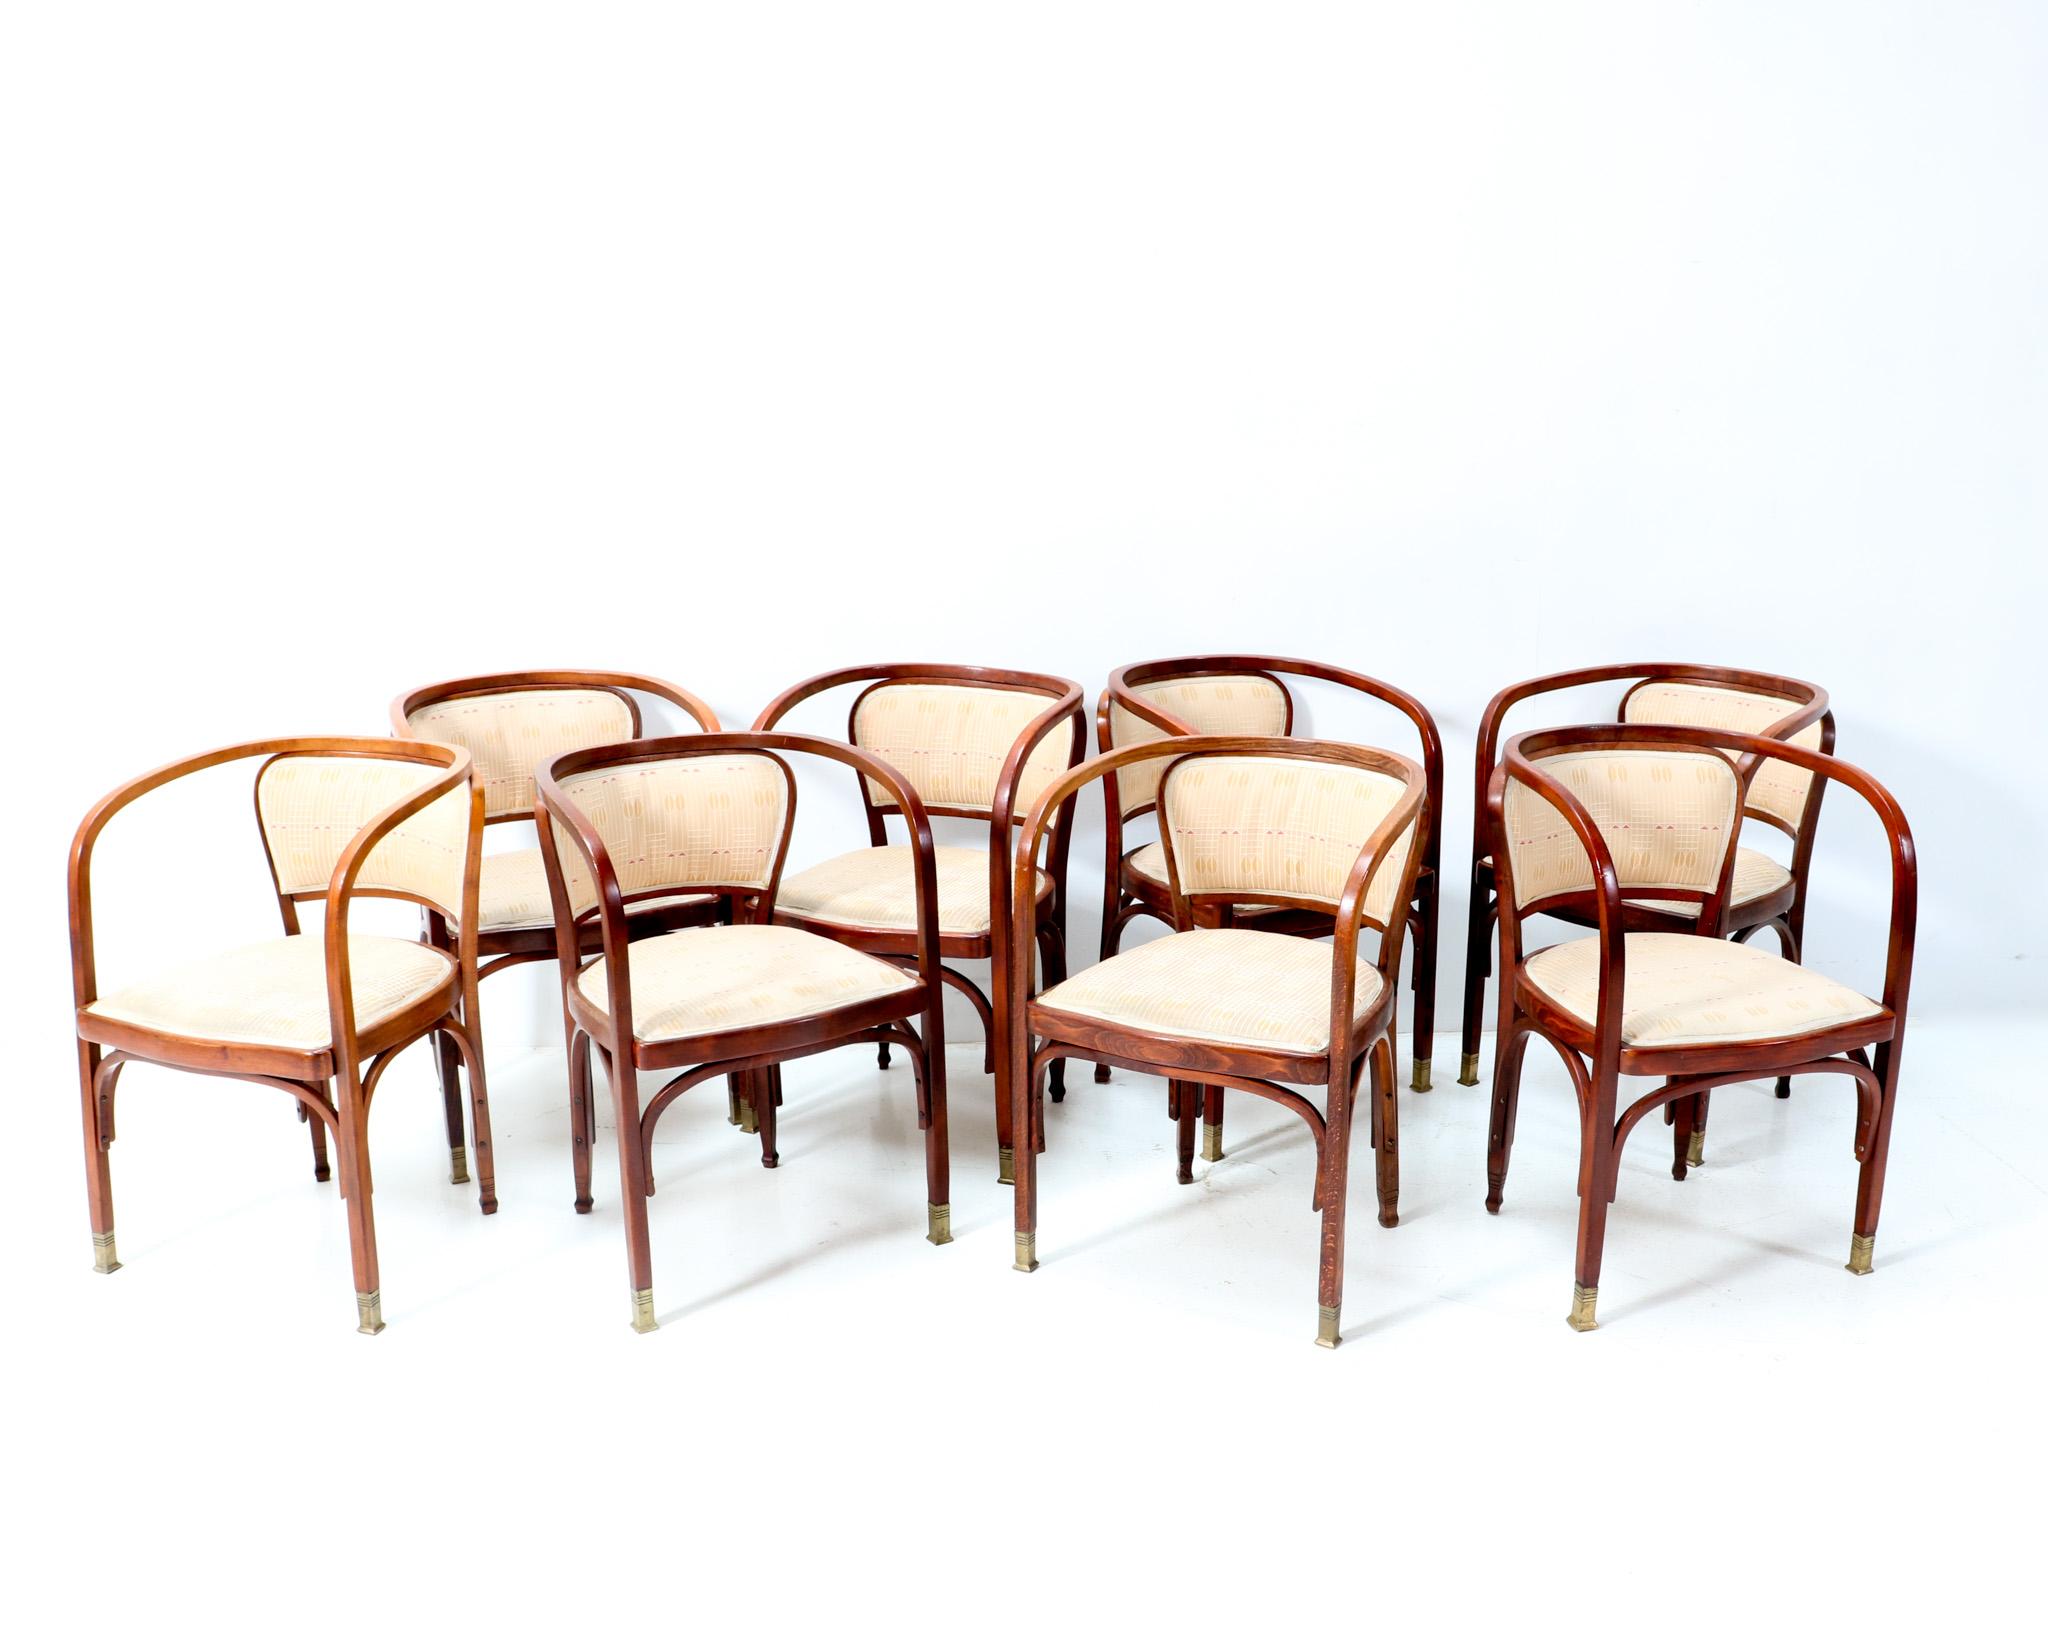 Stunning set of eight Vienna Secession Model 715F armchairs.
Design by Gustav Siegel for Jacob & Josef Kohn.
Striking Austrian design from the 1900s.
Lacquered solid beech bentwood frames with legs ending in brass sabots.
The Backhausen fabric